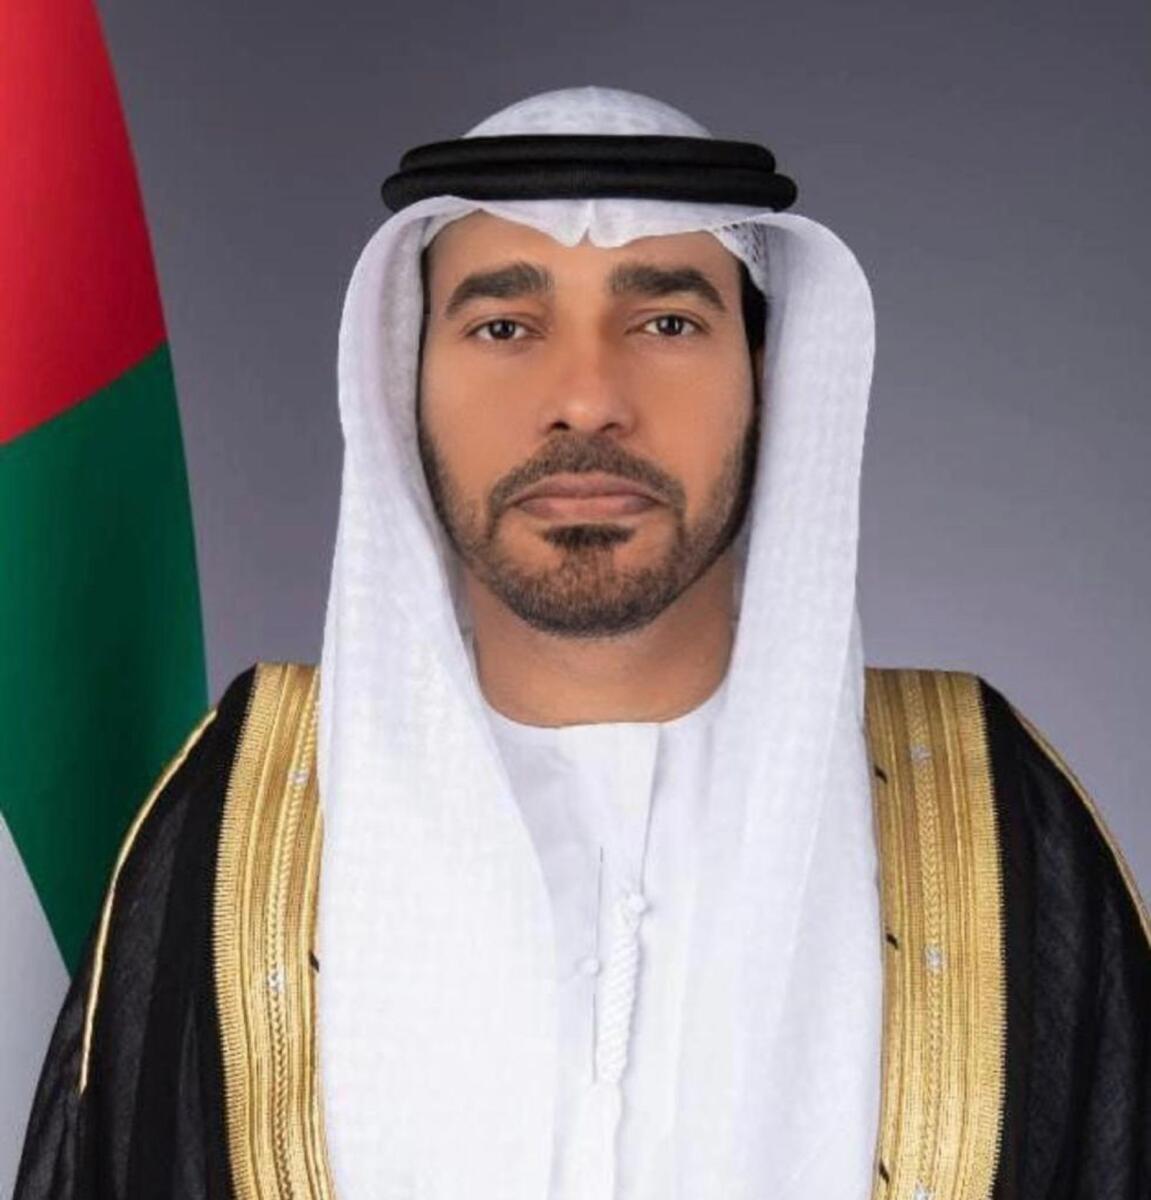 Saeed Thani Hareb Al Dhaheri, UAE Ambassador to the Republic of Türkiye, said both the UAE and Türkiye are aiming to further enhance trade relations, as their relationship is strengthened and startups projects are established.